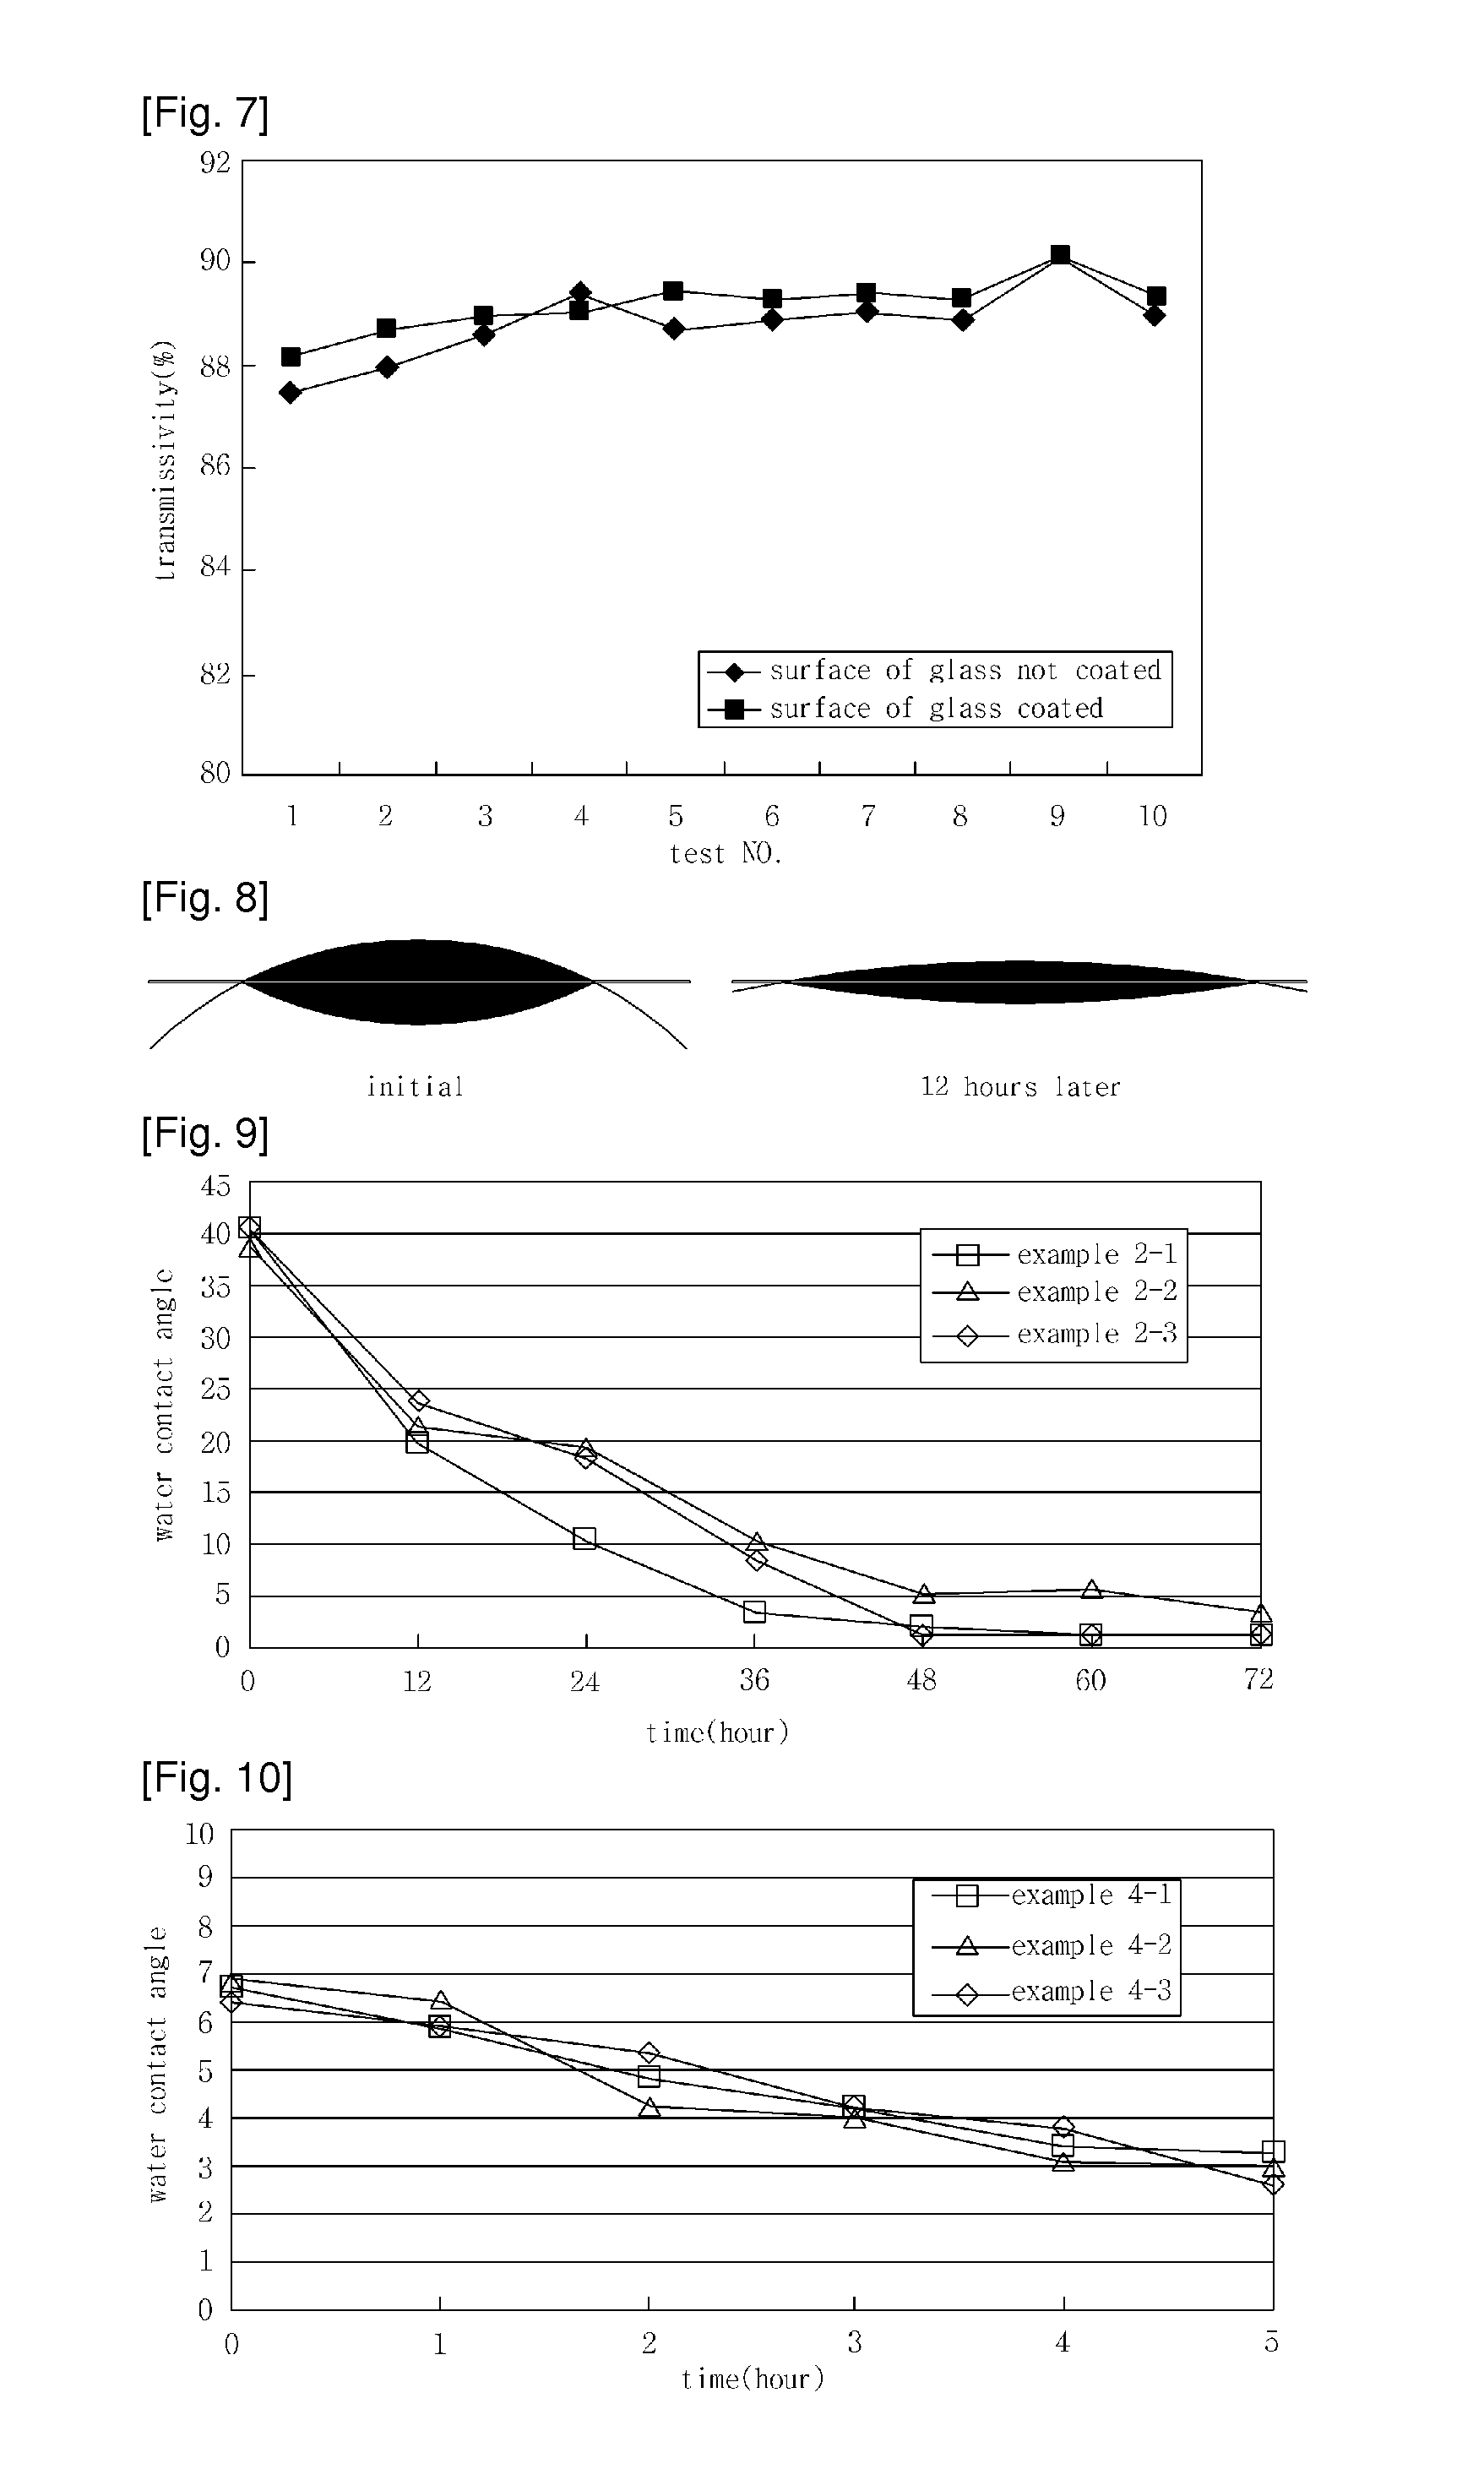 Photocatalytic composition for Anti-reflection and the glass substrate coated with the composition